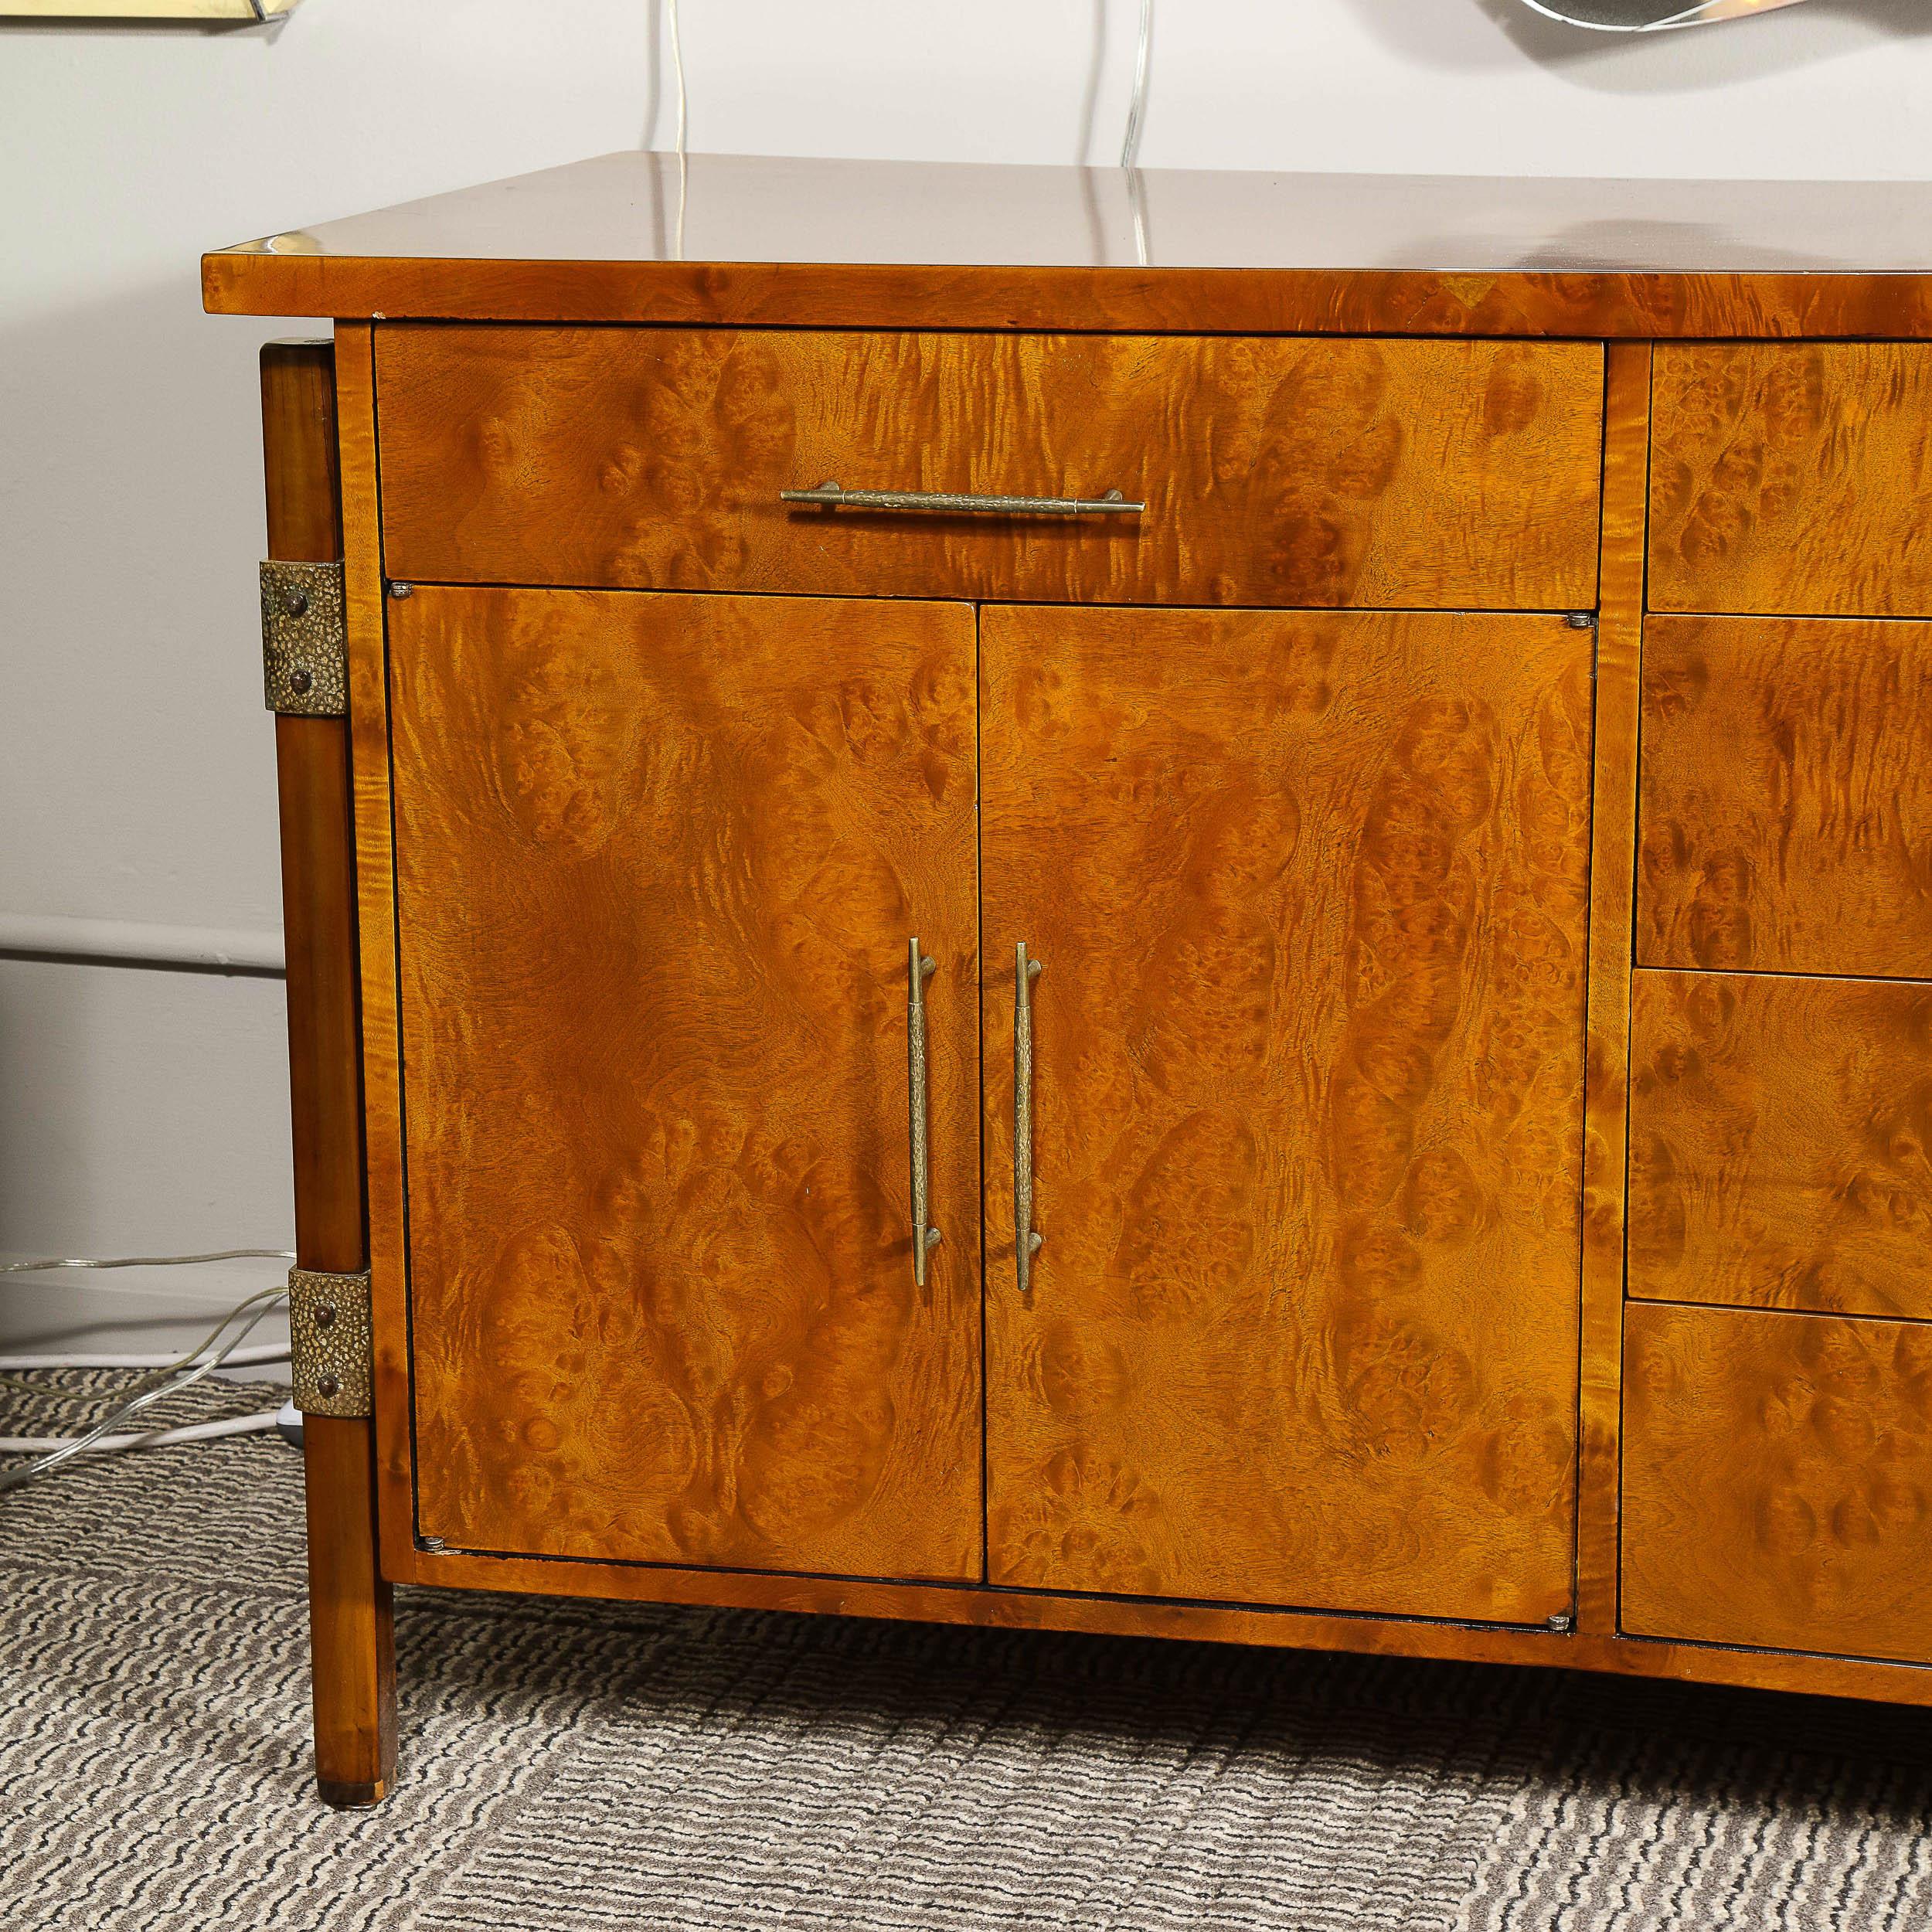 This stunning Mid-Century Modern sideboard was designed by the illustrious Harold Schwartz and realized by the Romweber Furniture Company in the United States, circa 1950. It features a volumetric rectangular body in a caramel hued walnut with a